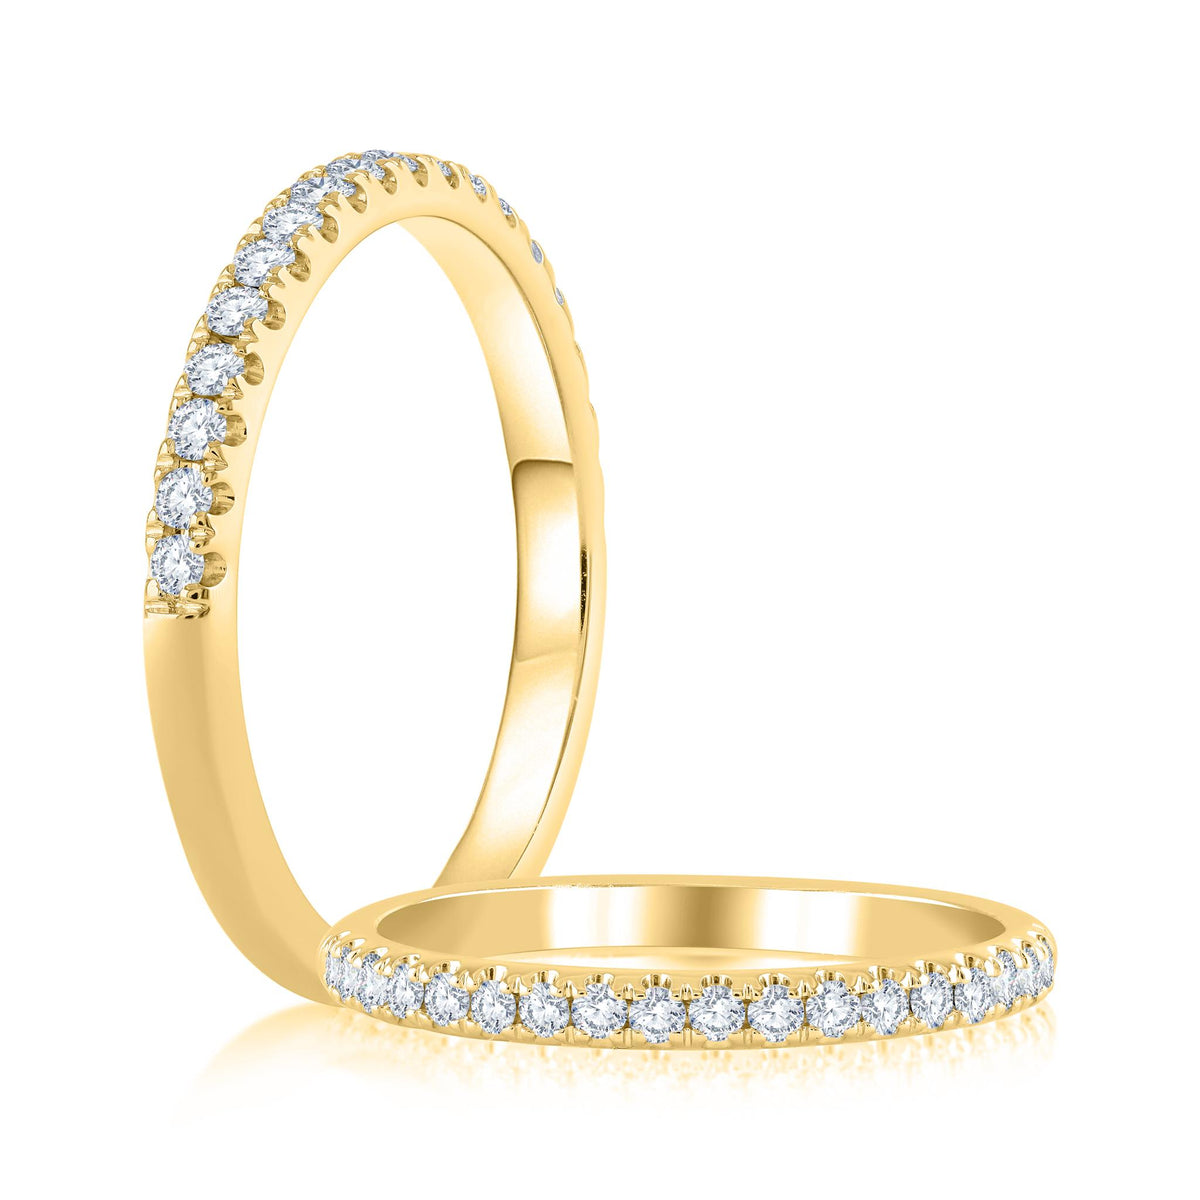 14Kt Yellow Gold Galaxy Ring With 0.25cttw Natural Diamonds